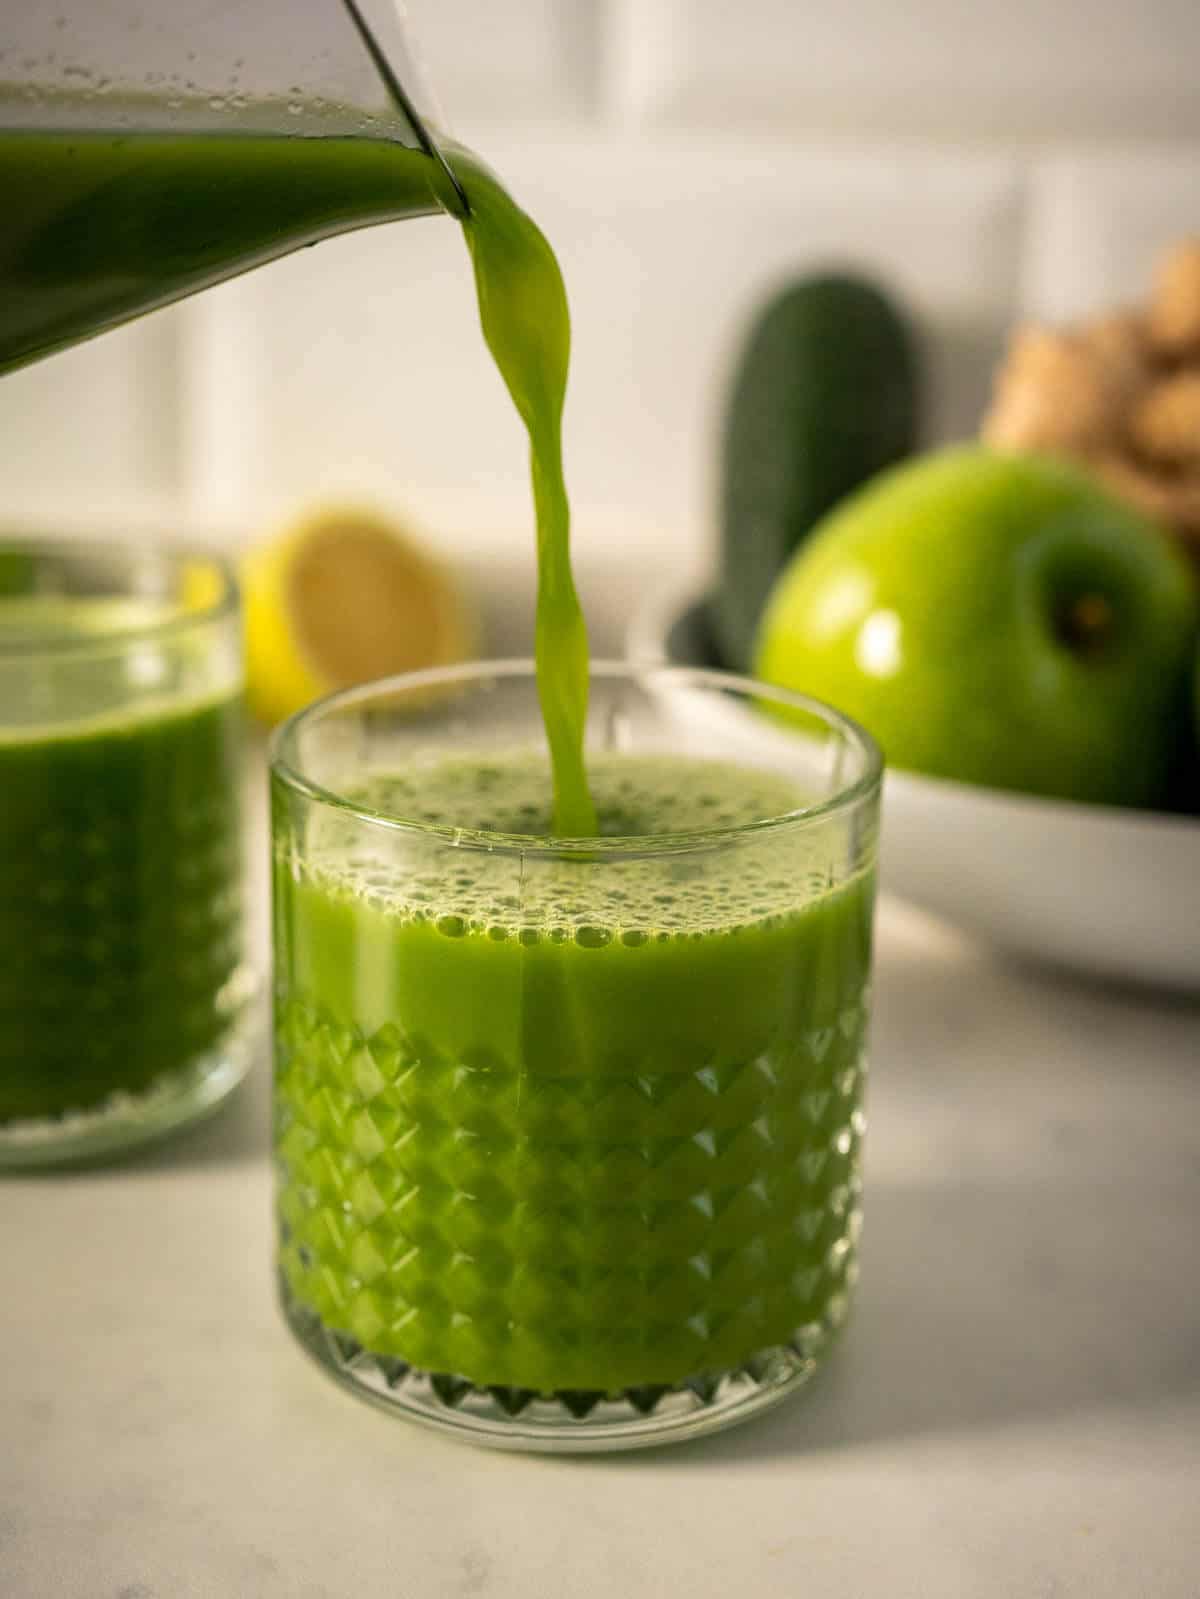 serving Spinach and Green Mean apple juice.